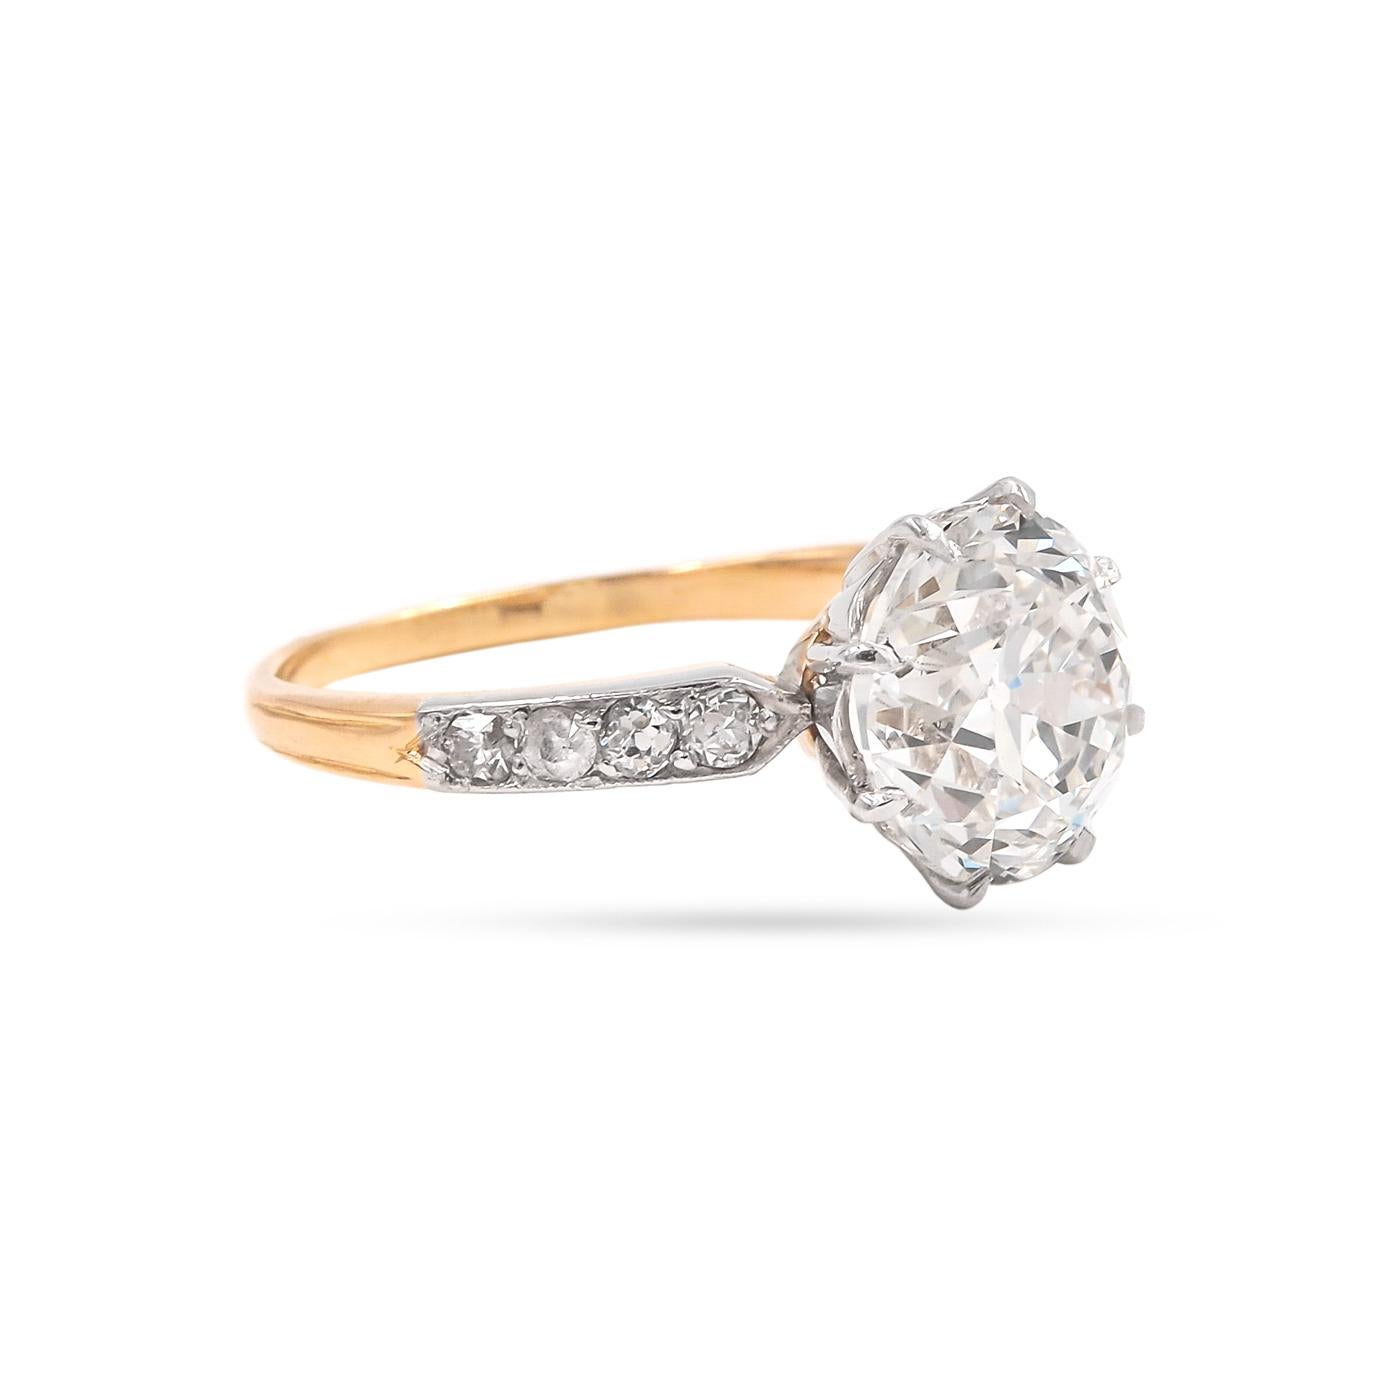 Edwardian era 3.23 Carat Old European Cut Diamond Ring composed of 18k yellow gold and platinum. GIA certified J color/VVS2 clarity. With an additional 8 Old Mine Cut diamonds weighing approximately 0.28 carats in total on the shoulders. Platinum